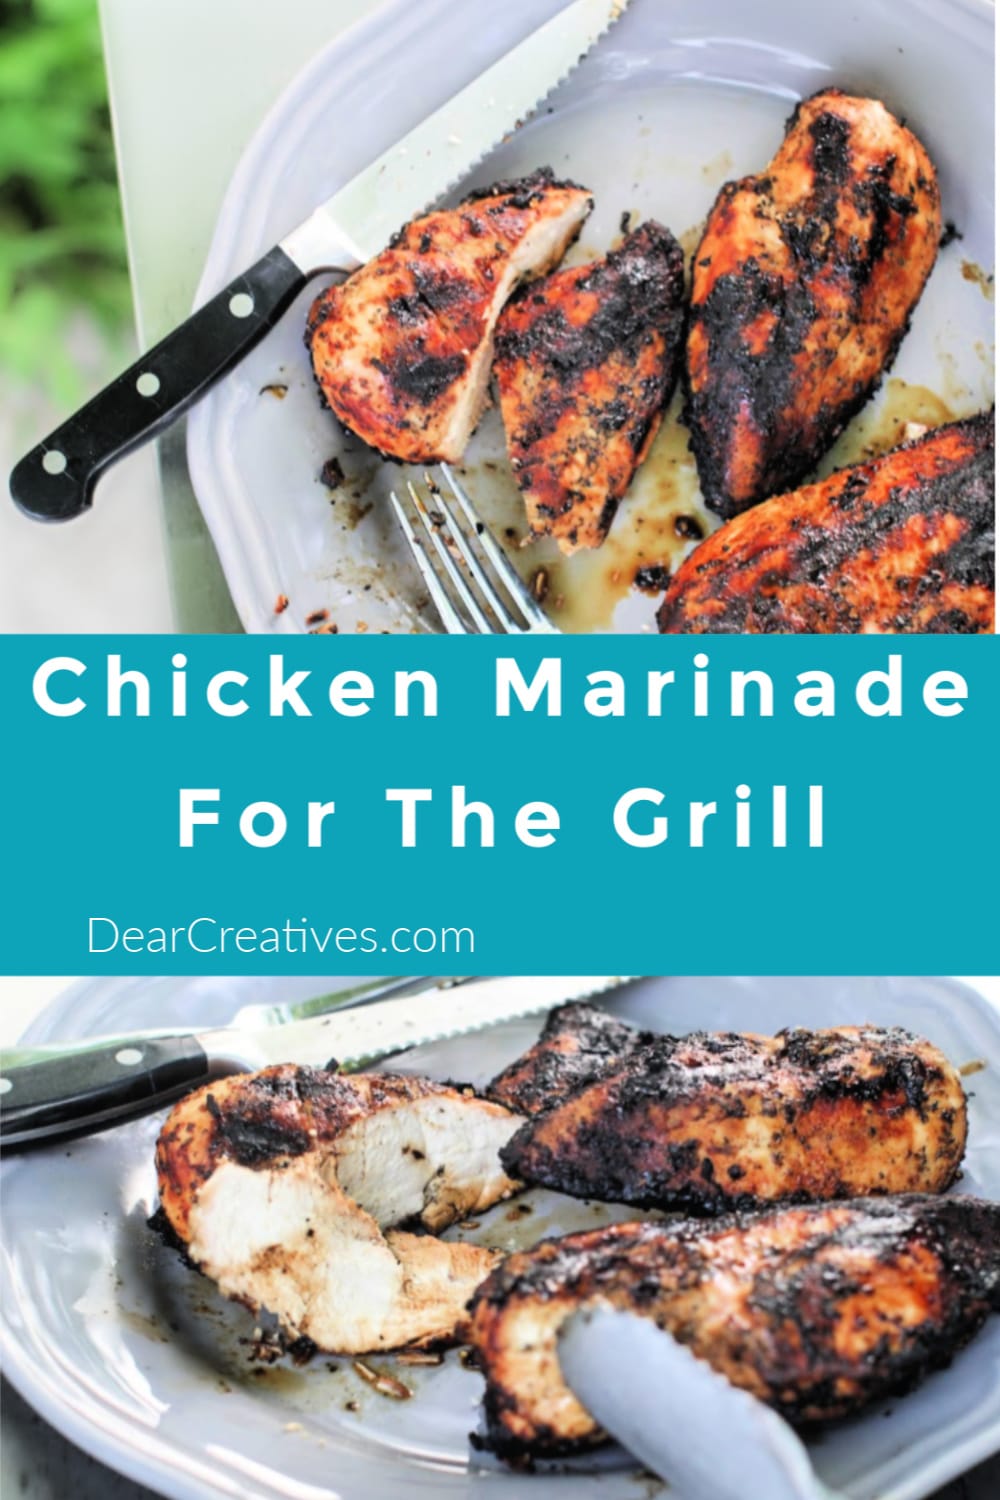 Chicken Marinade For The Grill